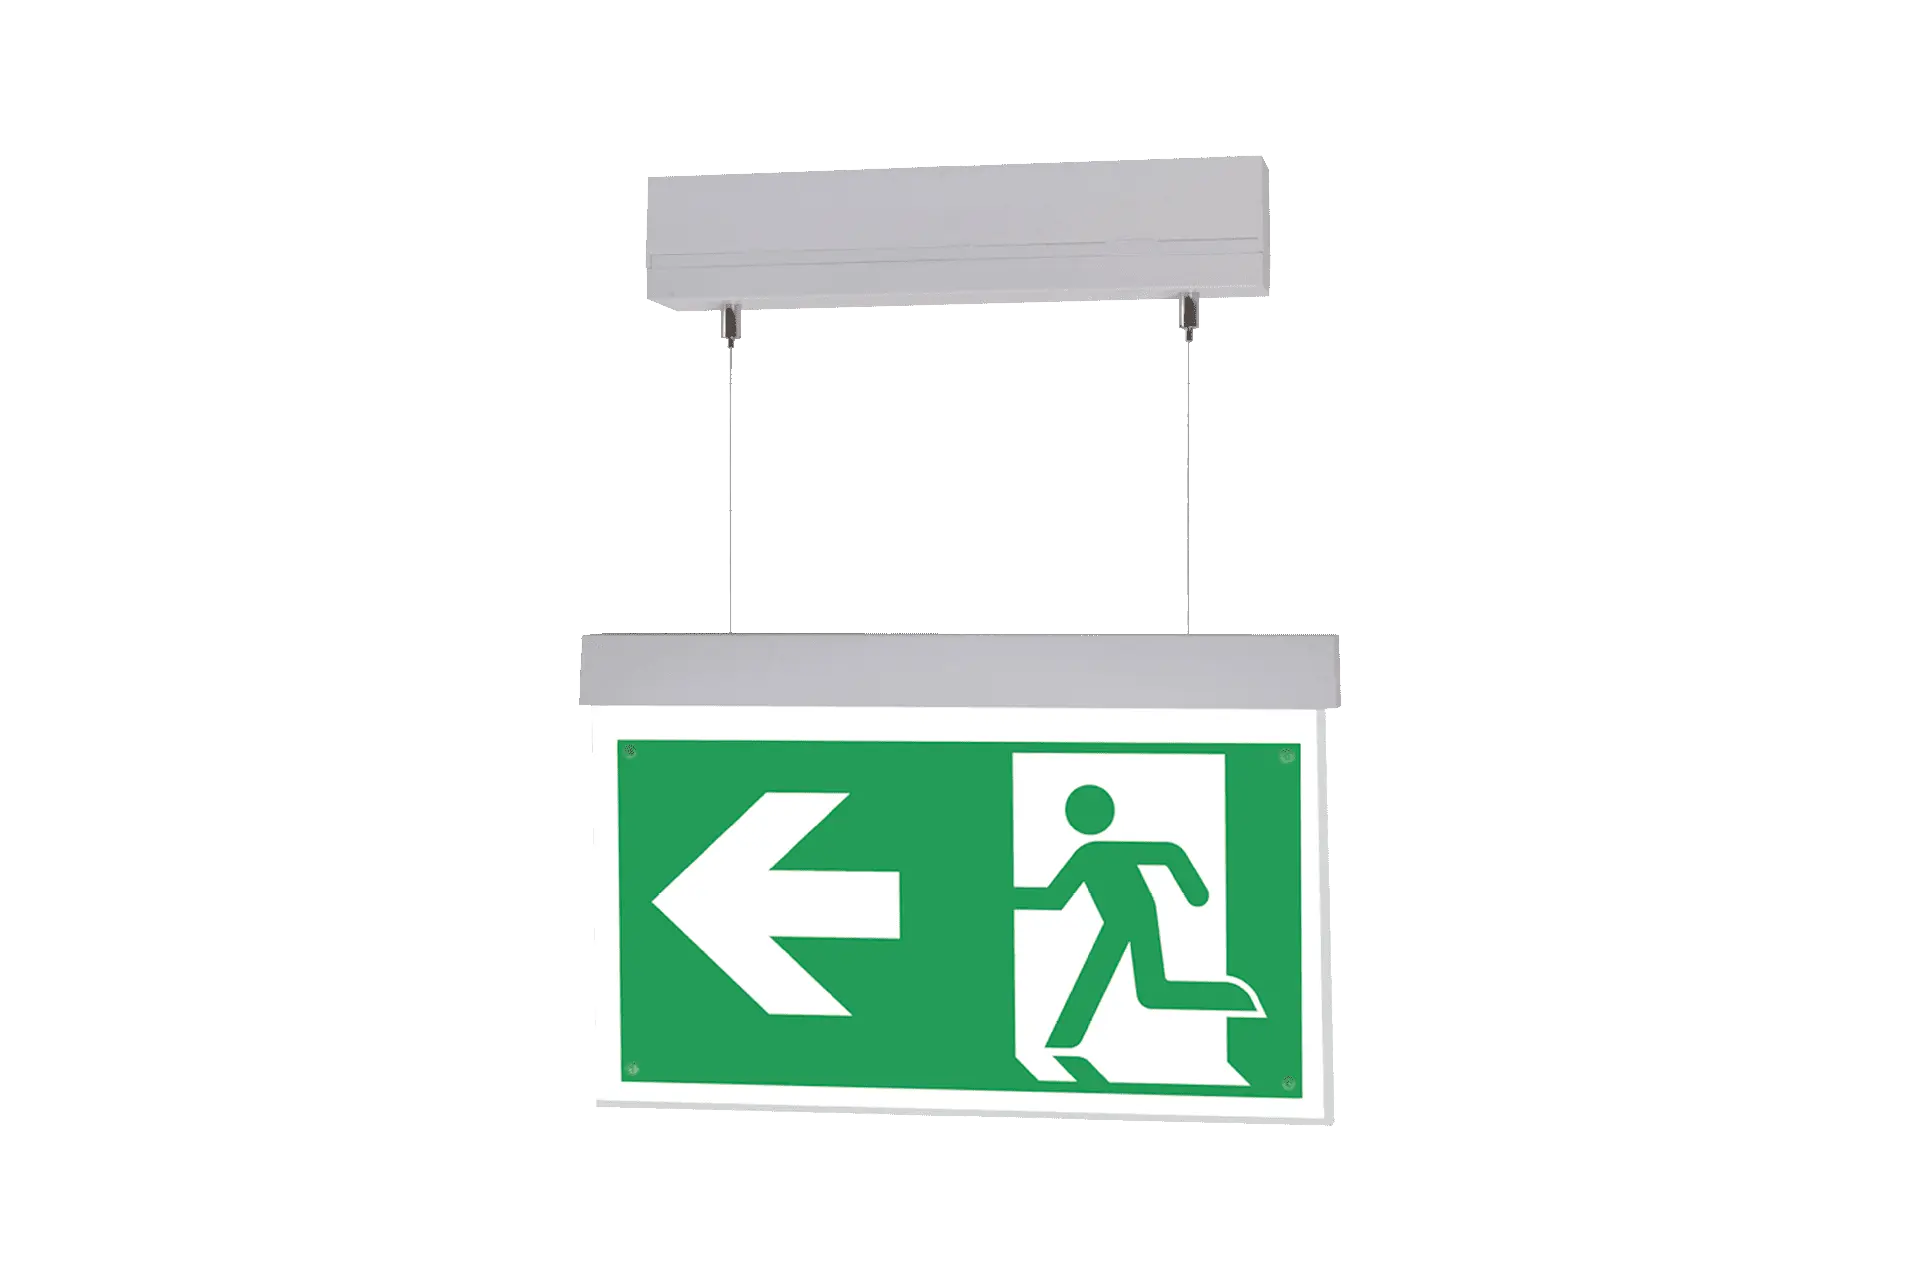 Escape sign luminaire SIGMA-L 49DMS009 for central battery